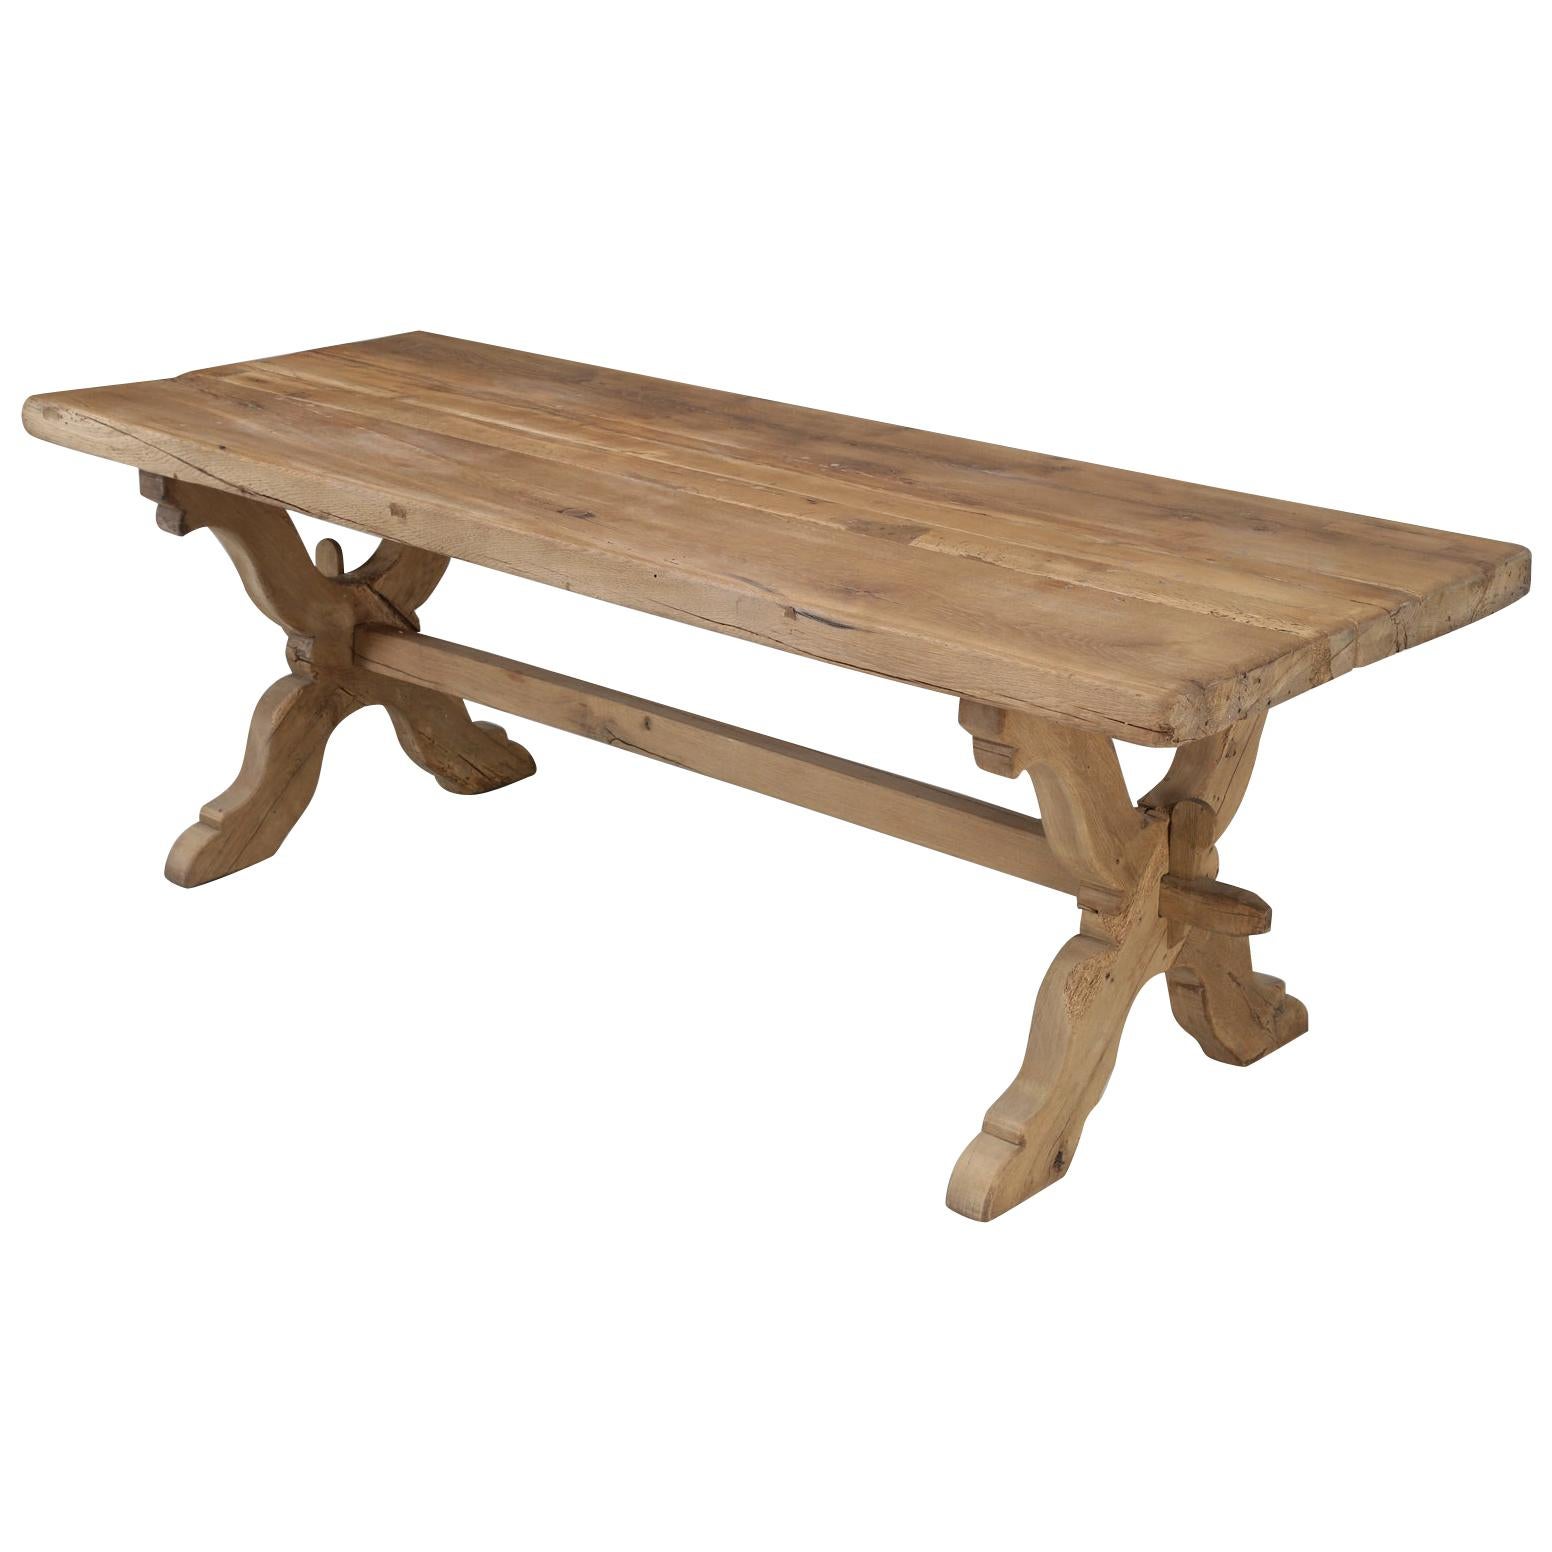 Antique Country French White Oak Trestle Dining Table with a Natural Patina